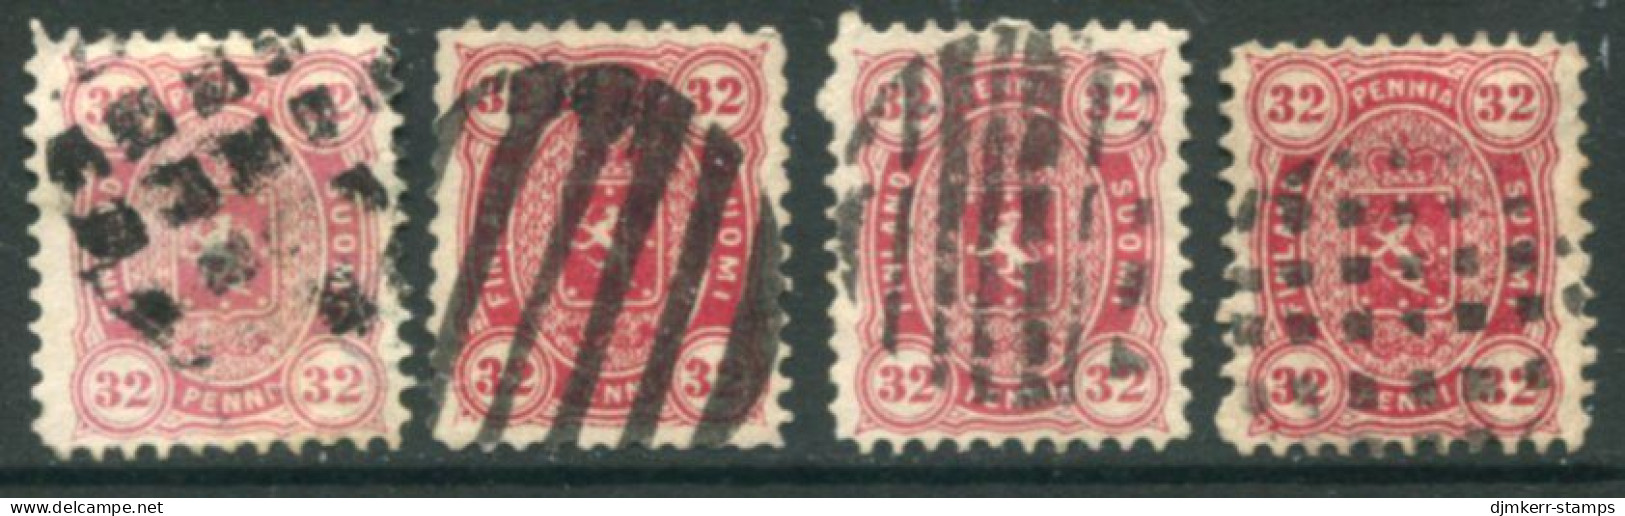 FINLAND 1875 32 P. Perforated 11 Used With Cork Or Wooden Cancellers (4).  Michel 18 Ax-y - Used Stamps